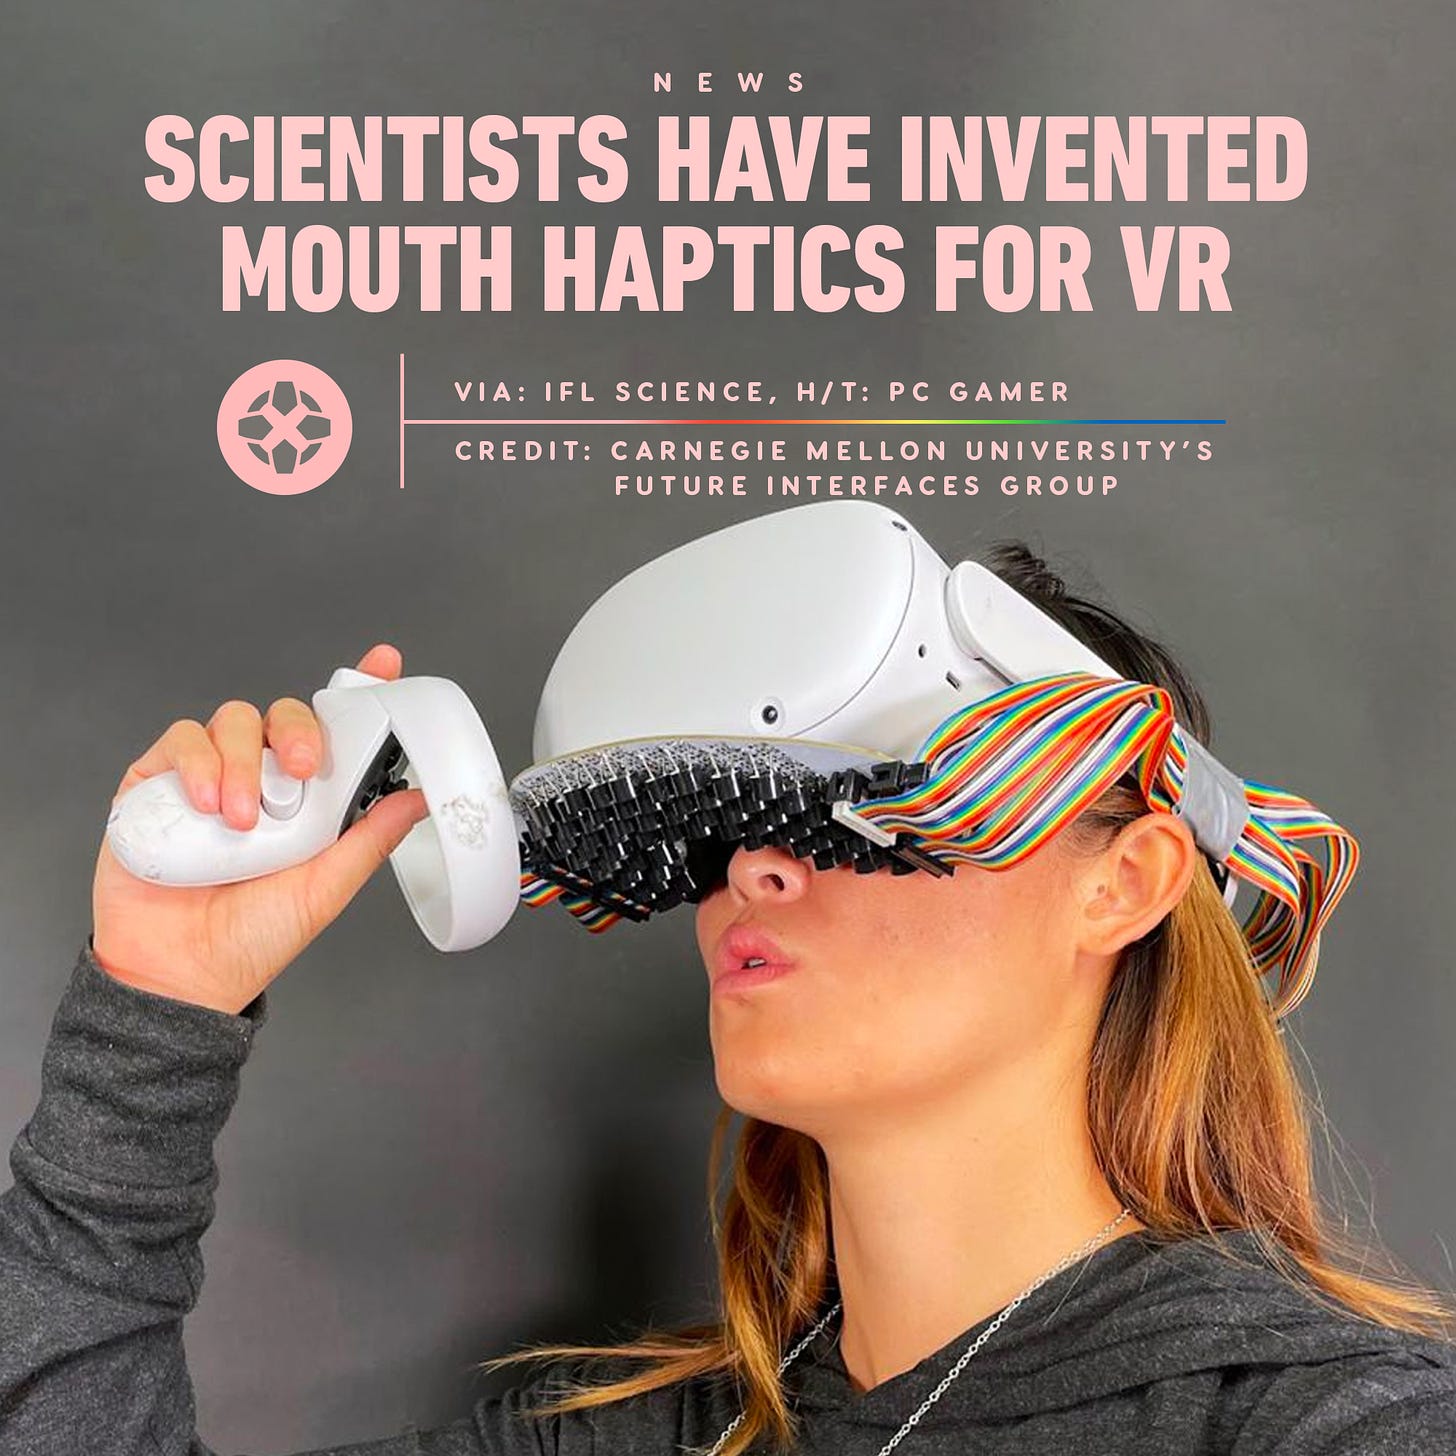 Scientists Have Invented Mouth Haptics for VR

Via: IFL Science, H/T: PC Gamer

Credit: Carnegie Mellon University's Future Interfaces Group